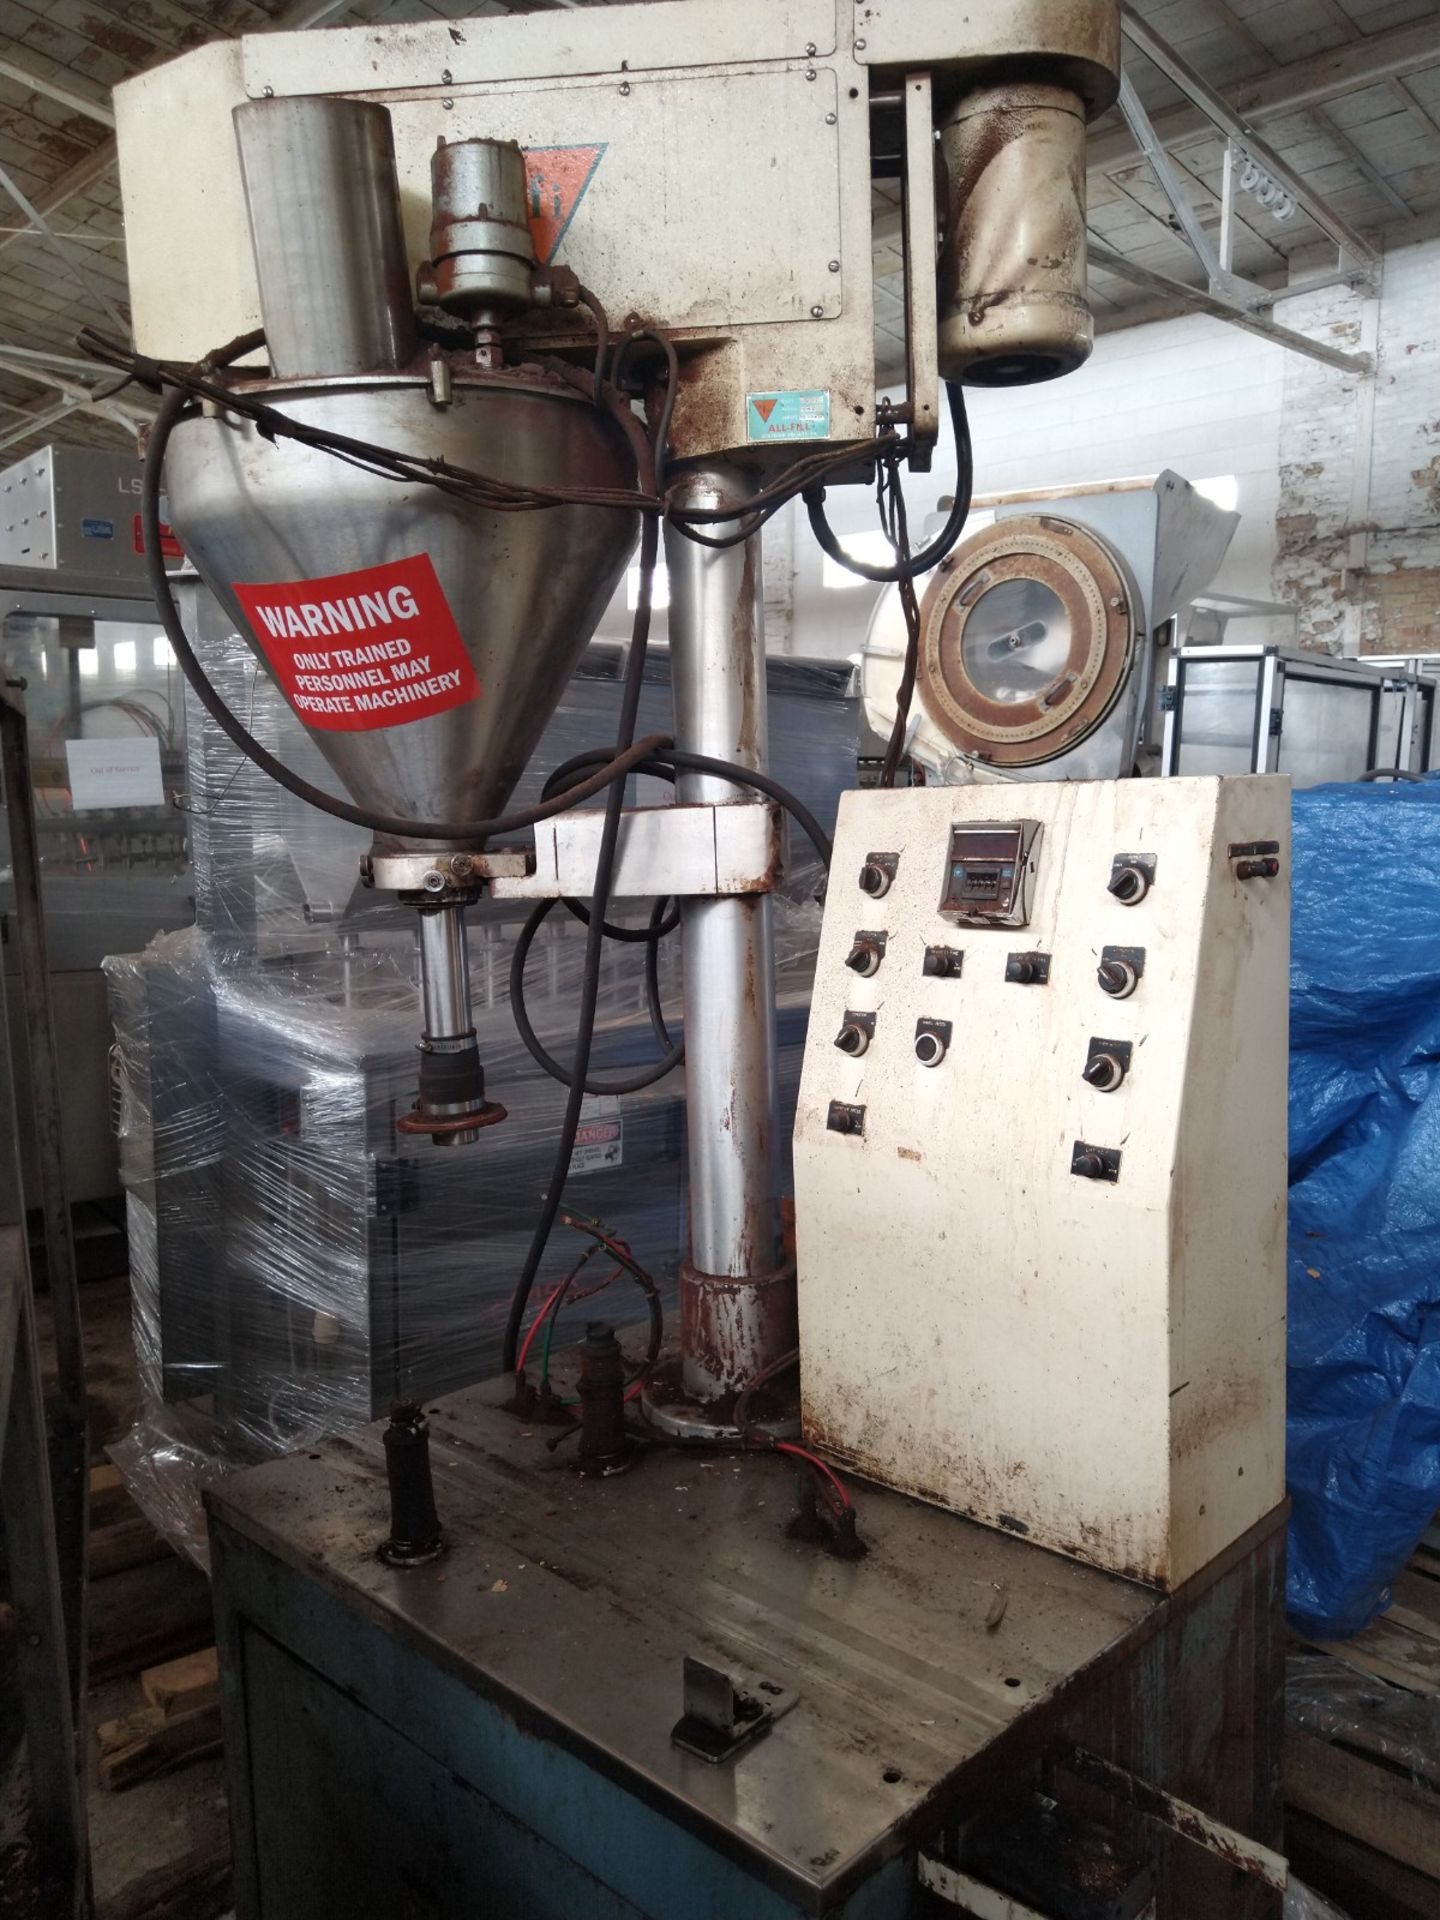 ALL FILL SINGLE HEAD AUTOMATIC AUGER FILLER, MODEL SHA, S/N 1273490 (LOCATED IN MT. PLEASANT, WI)